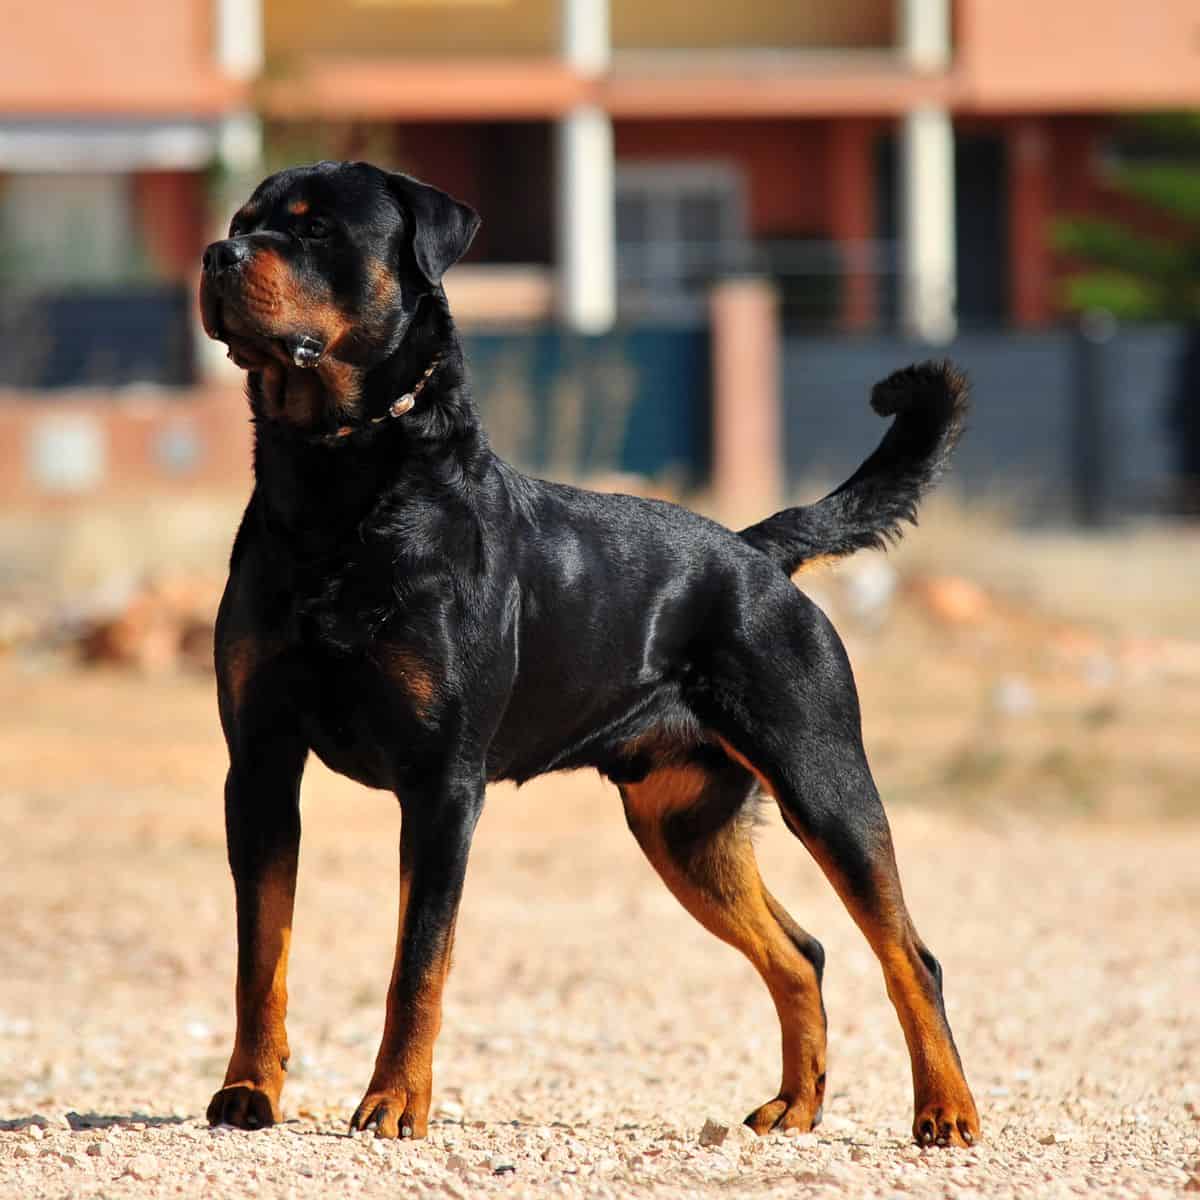 German rottweiler standing up outside